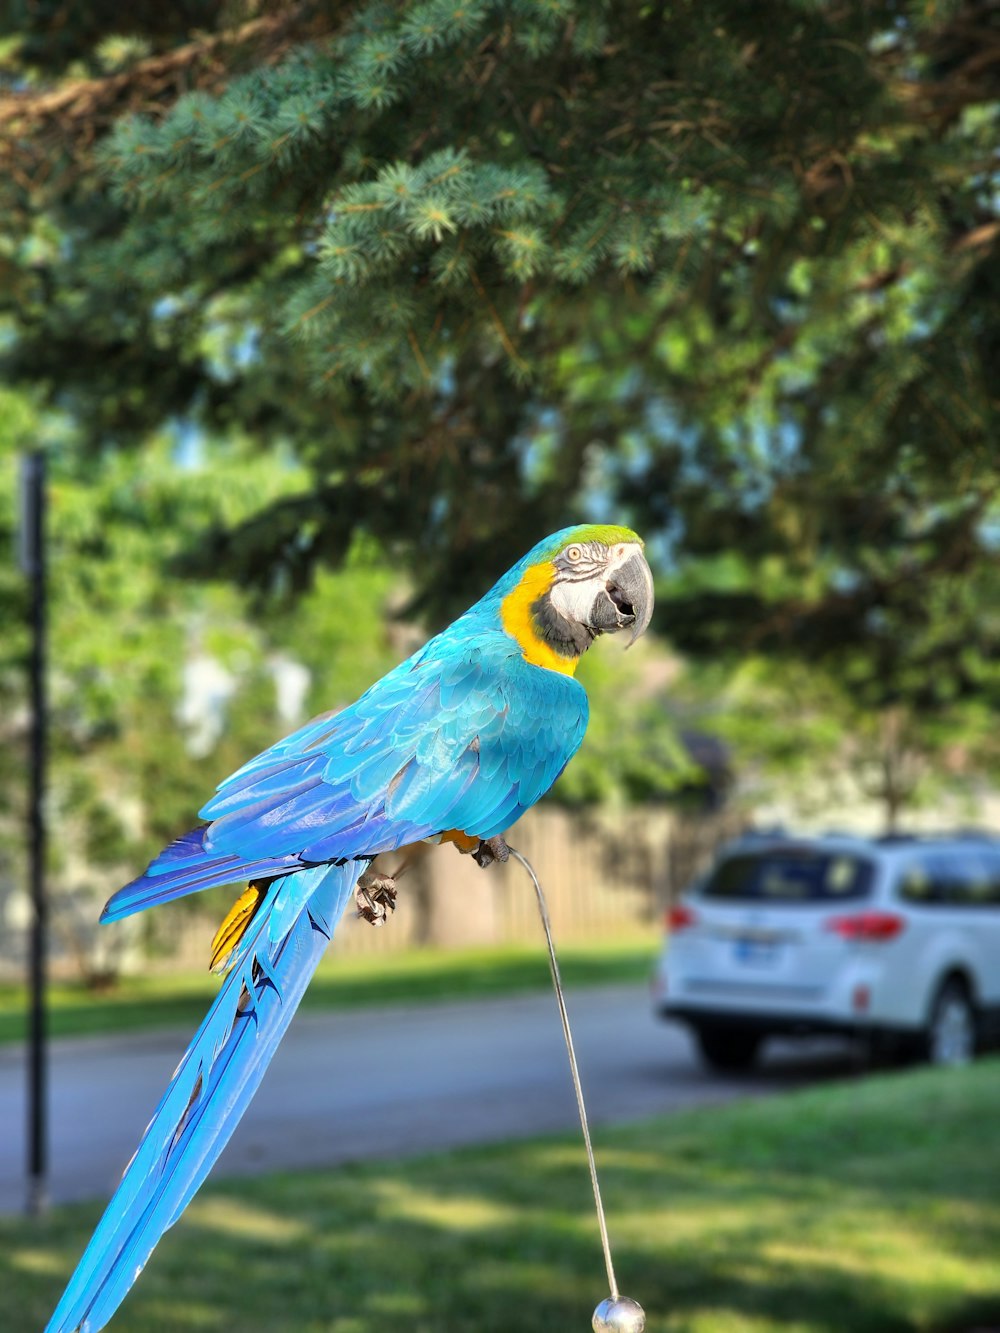 a blue and yellow parrot perched on a stick